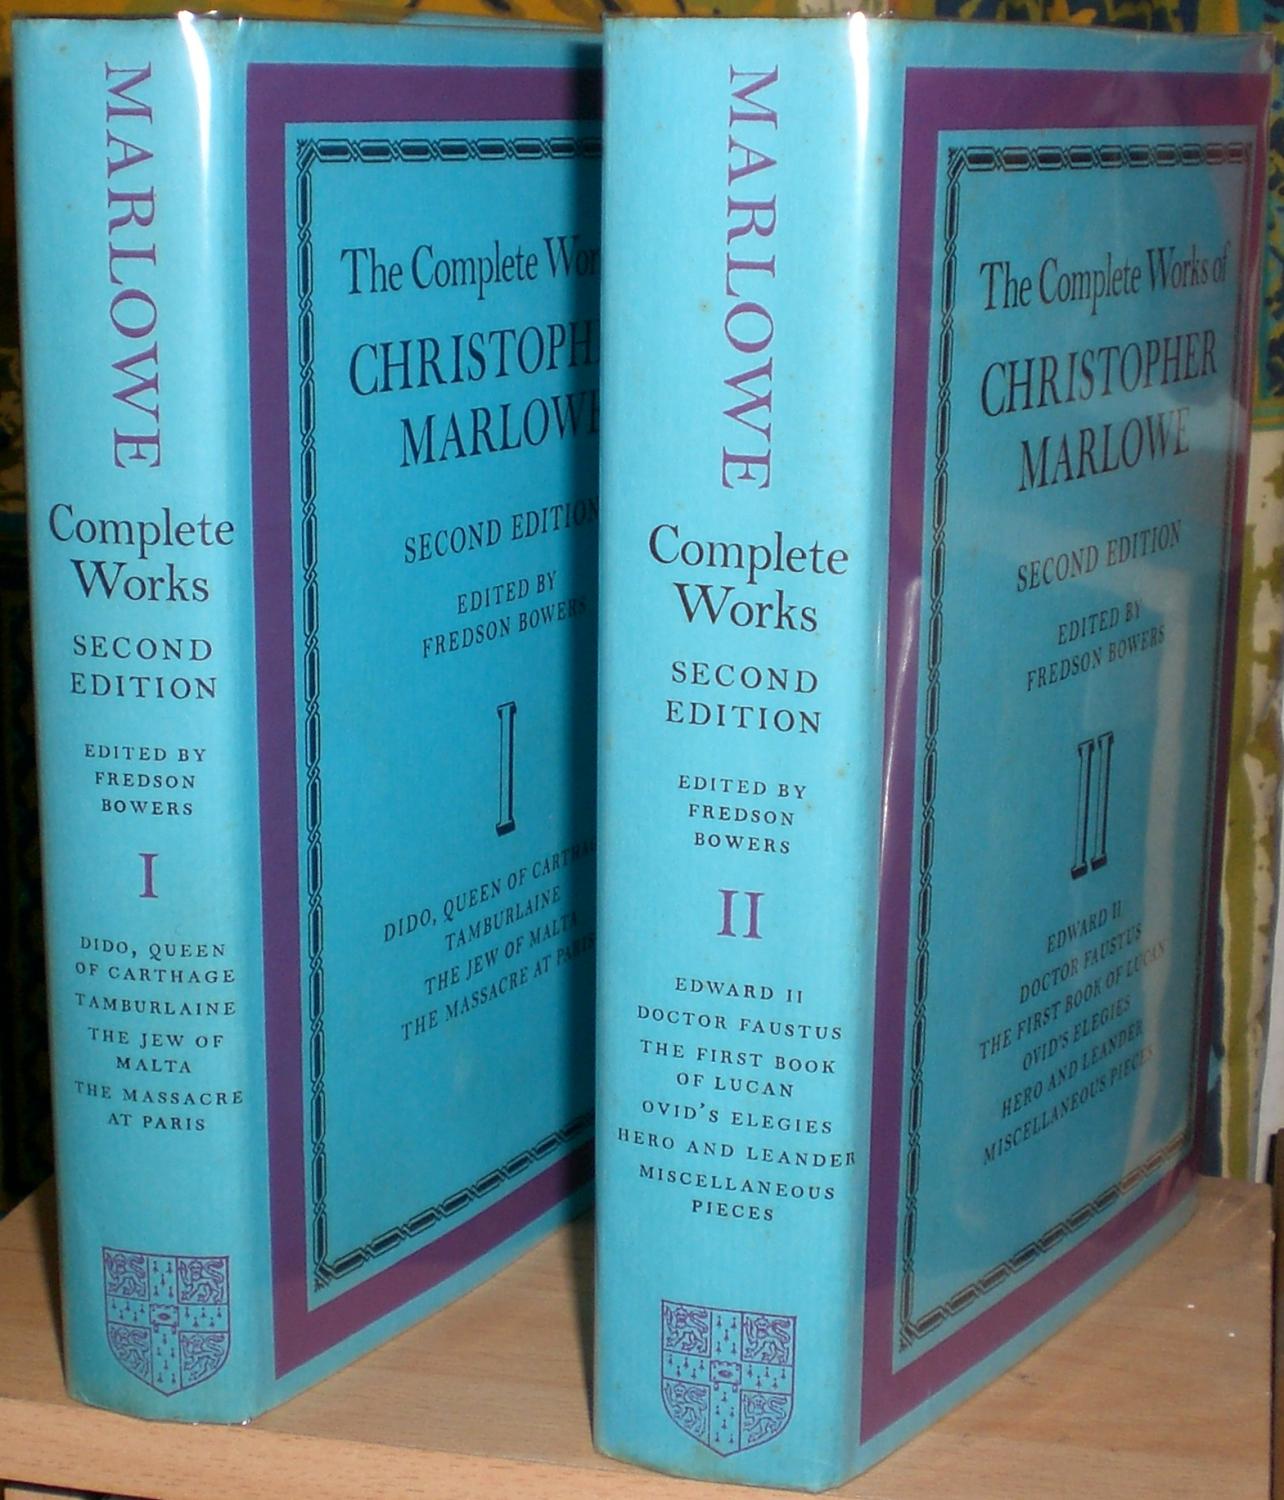 The Complete Works of Christopher Marlowe. Second edition. Volume I and volume II. Edited by Fredson Bowers. In two volumes. [Hardcover]. - MARLOWE (CHRISTOPHER) [bap.1564, d.1593]. Bowers (Fredson), editor.